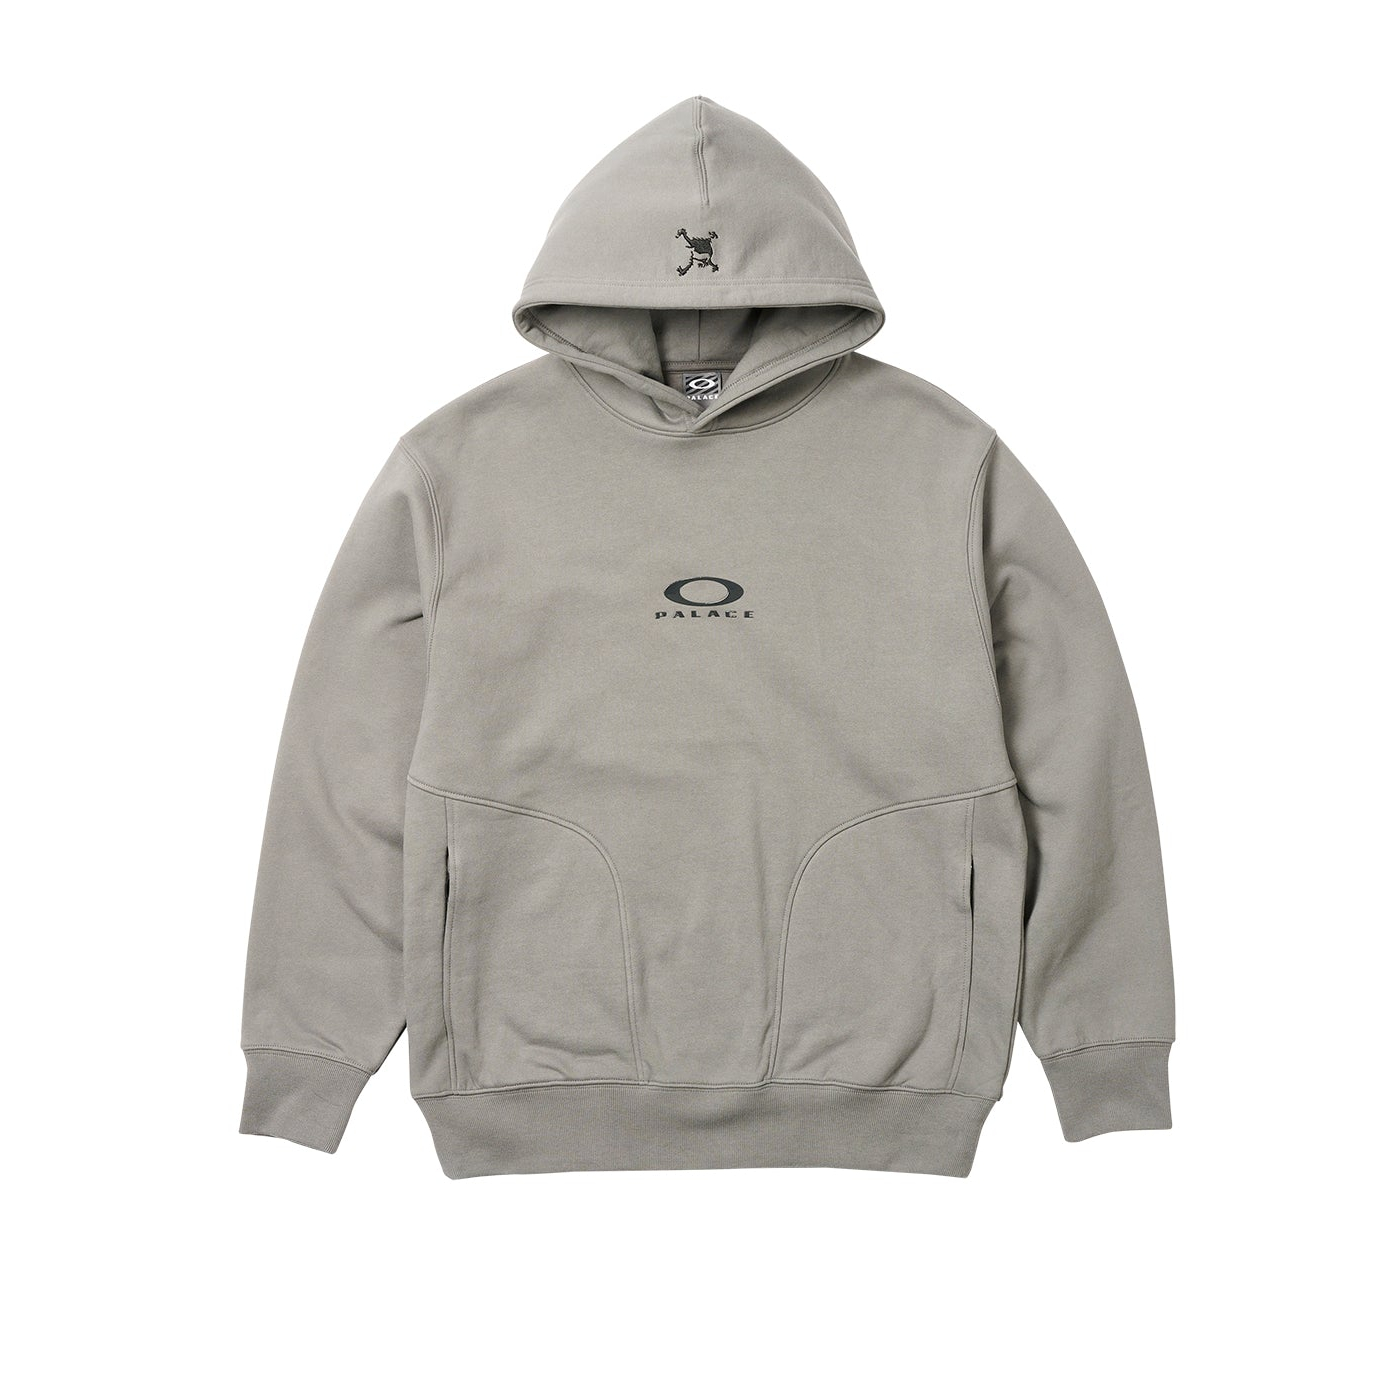 palace skateboards OAKLEY hoodie SAND S サービス - トップス